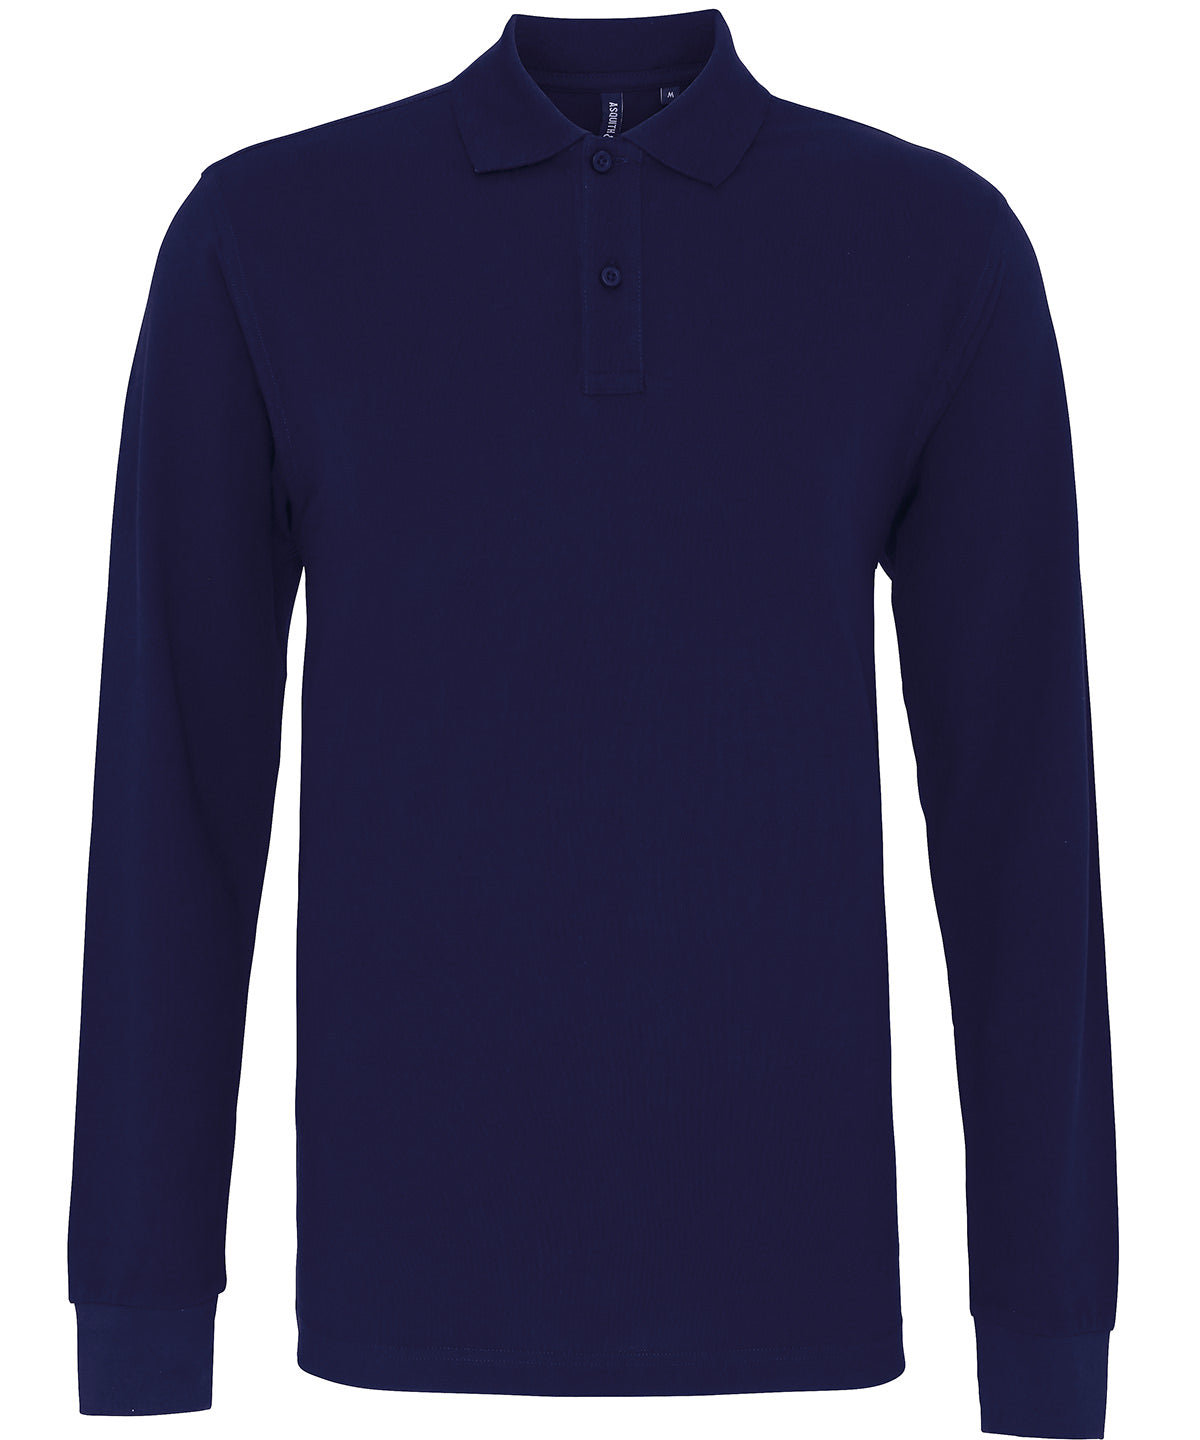 Personalised Polo Shirts - Black Asquith & Fox Men's classic fit long sleeved polo